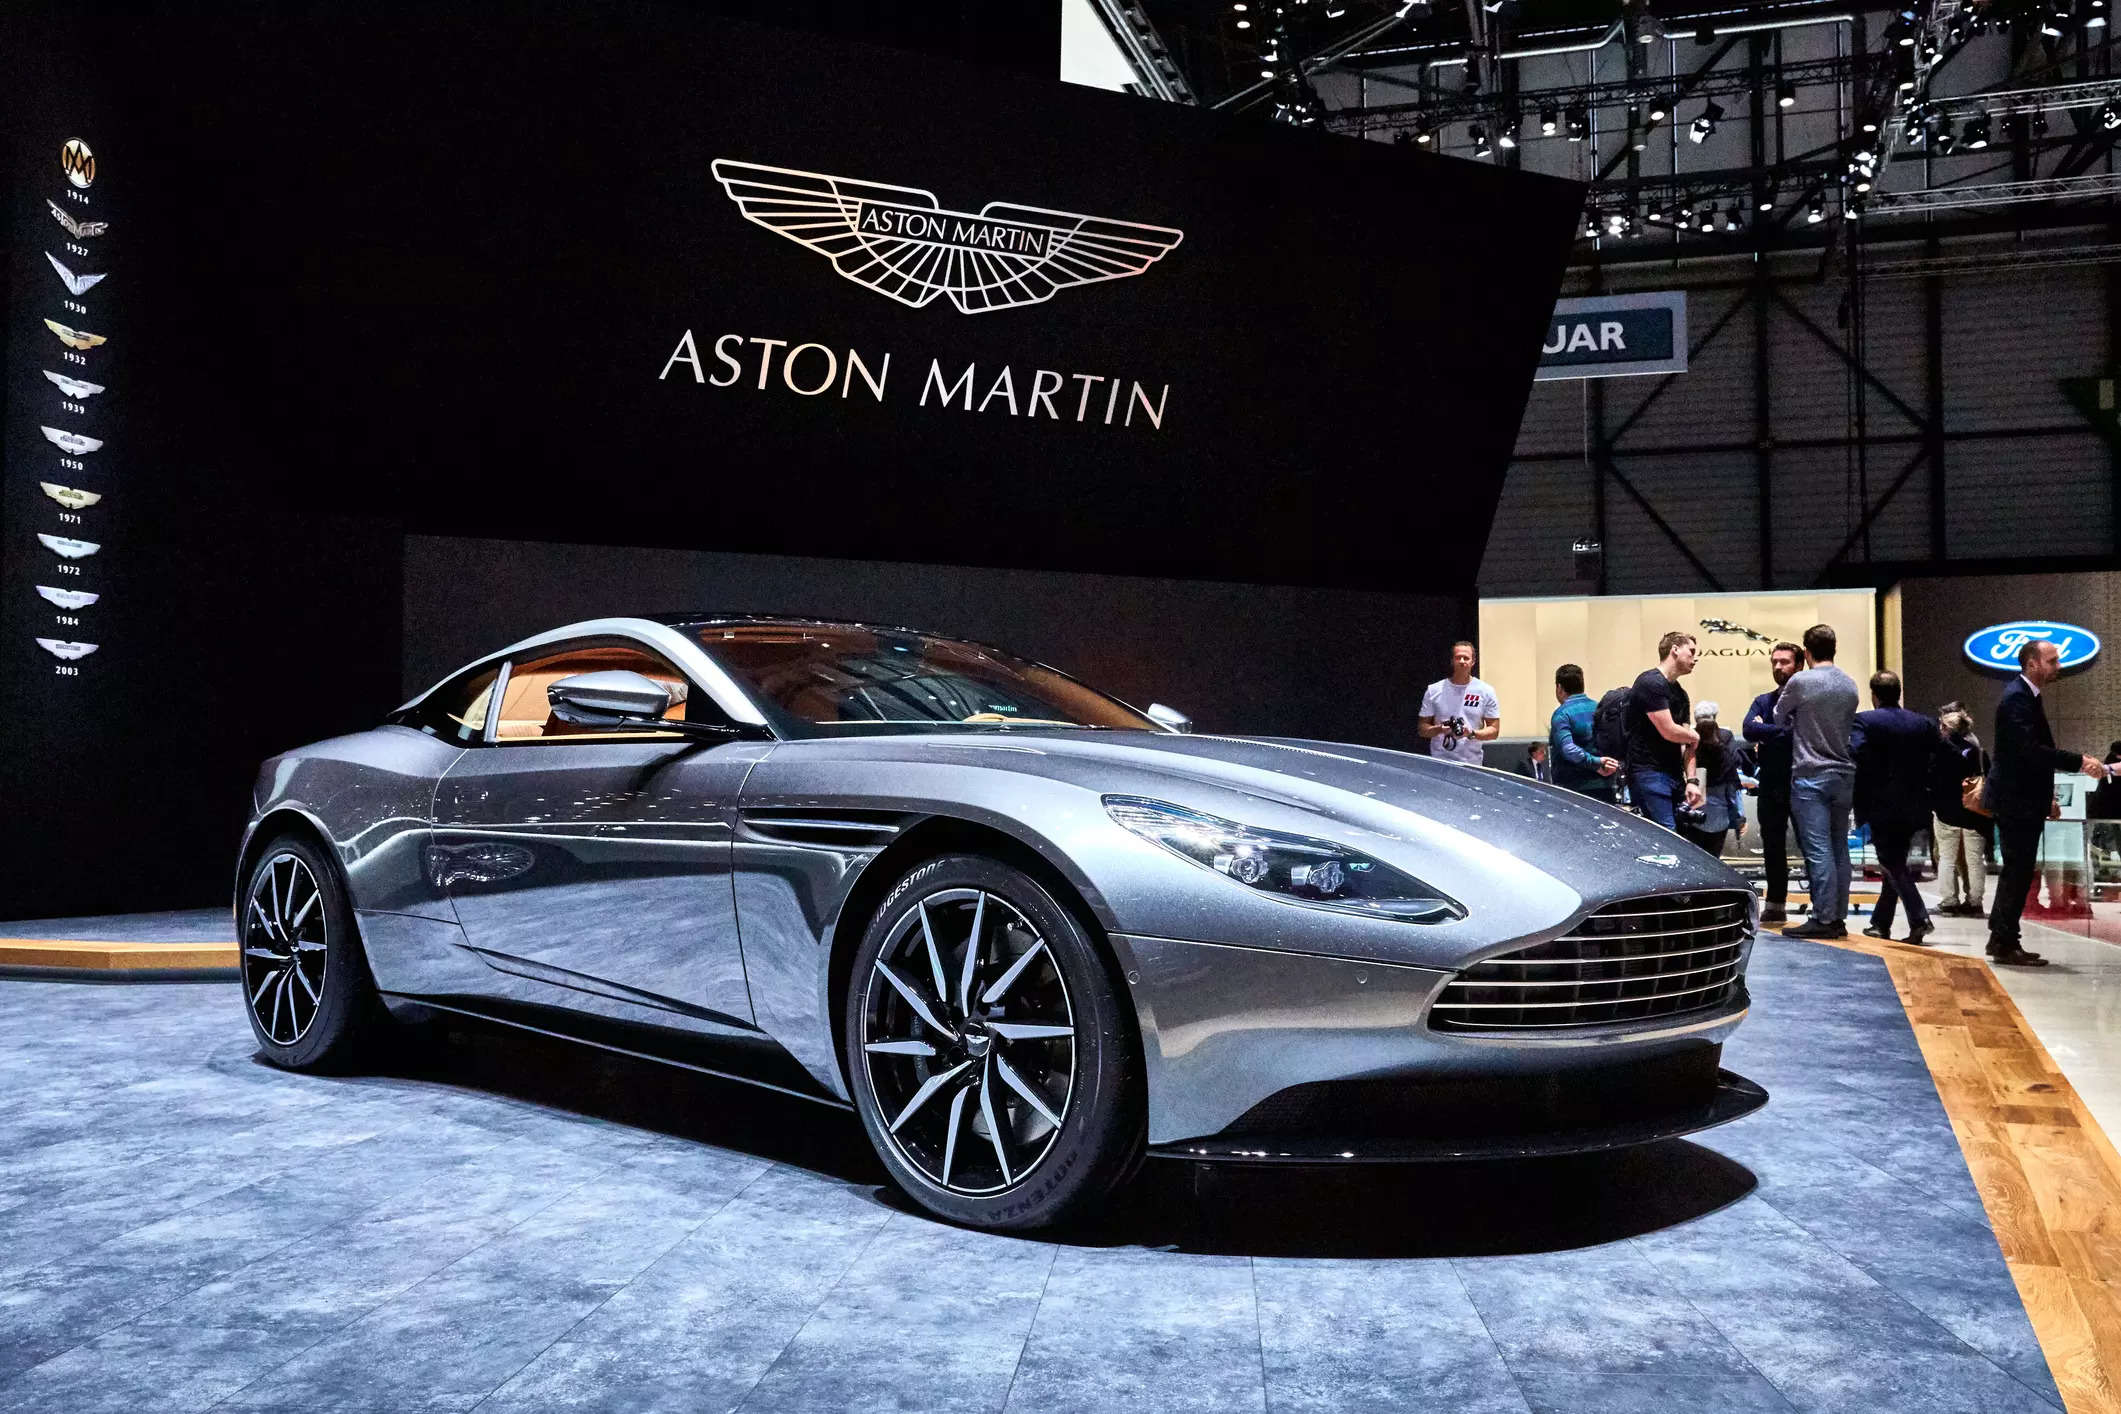 Aston Martin stock soars after USD 295 mn on Geely investment, ET Auto